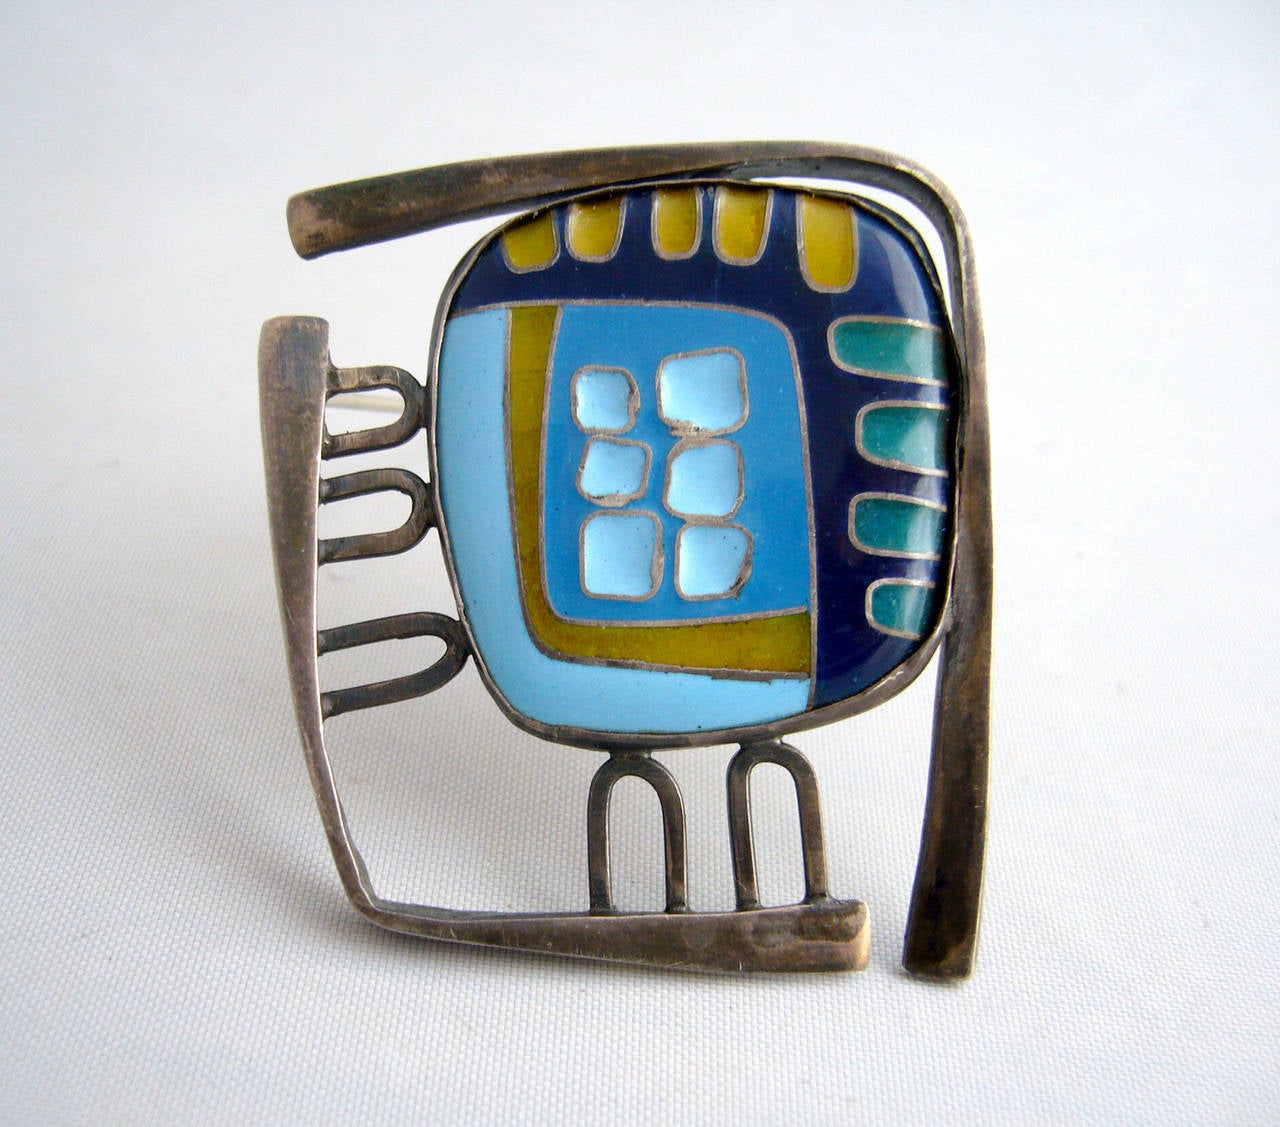 An enamel over sterling brooch of abstract design created by Polly Stehman of Yakima, Washington.  Brooch measures 1 3/4